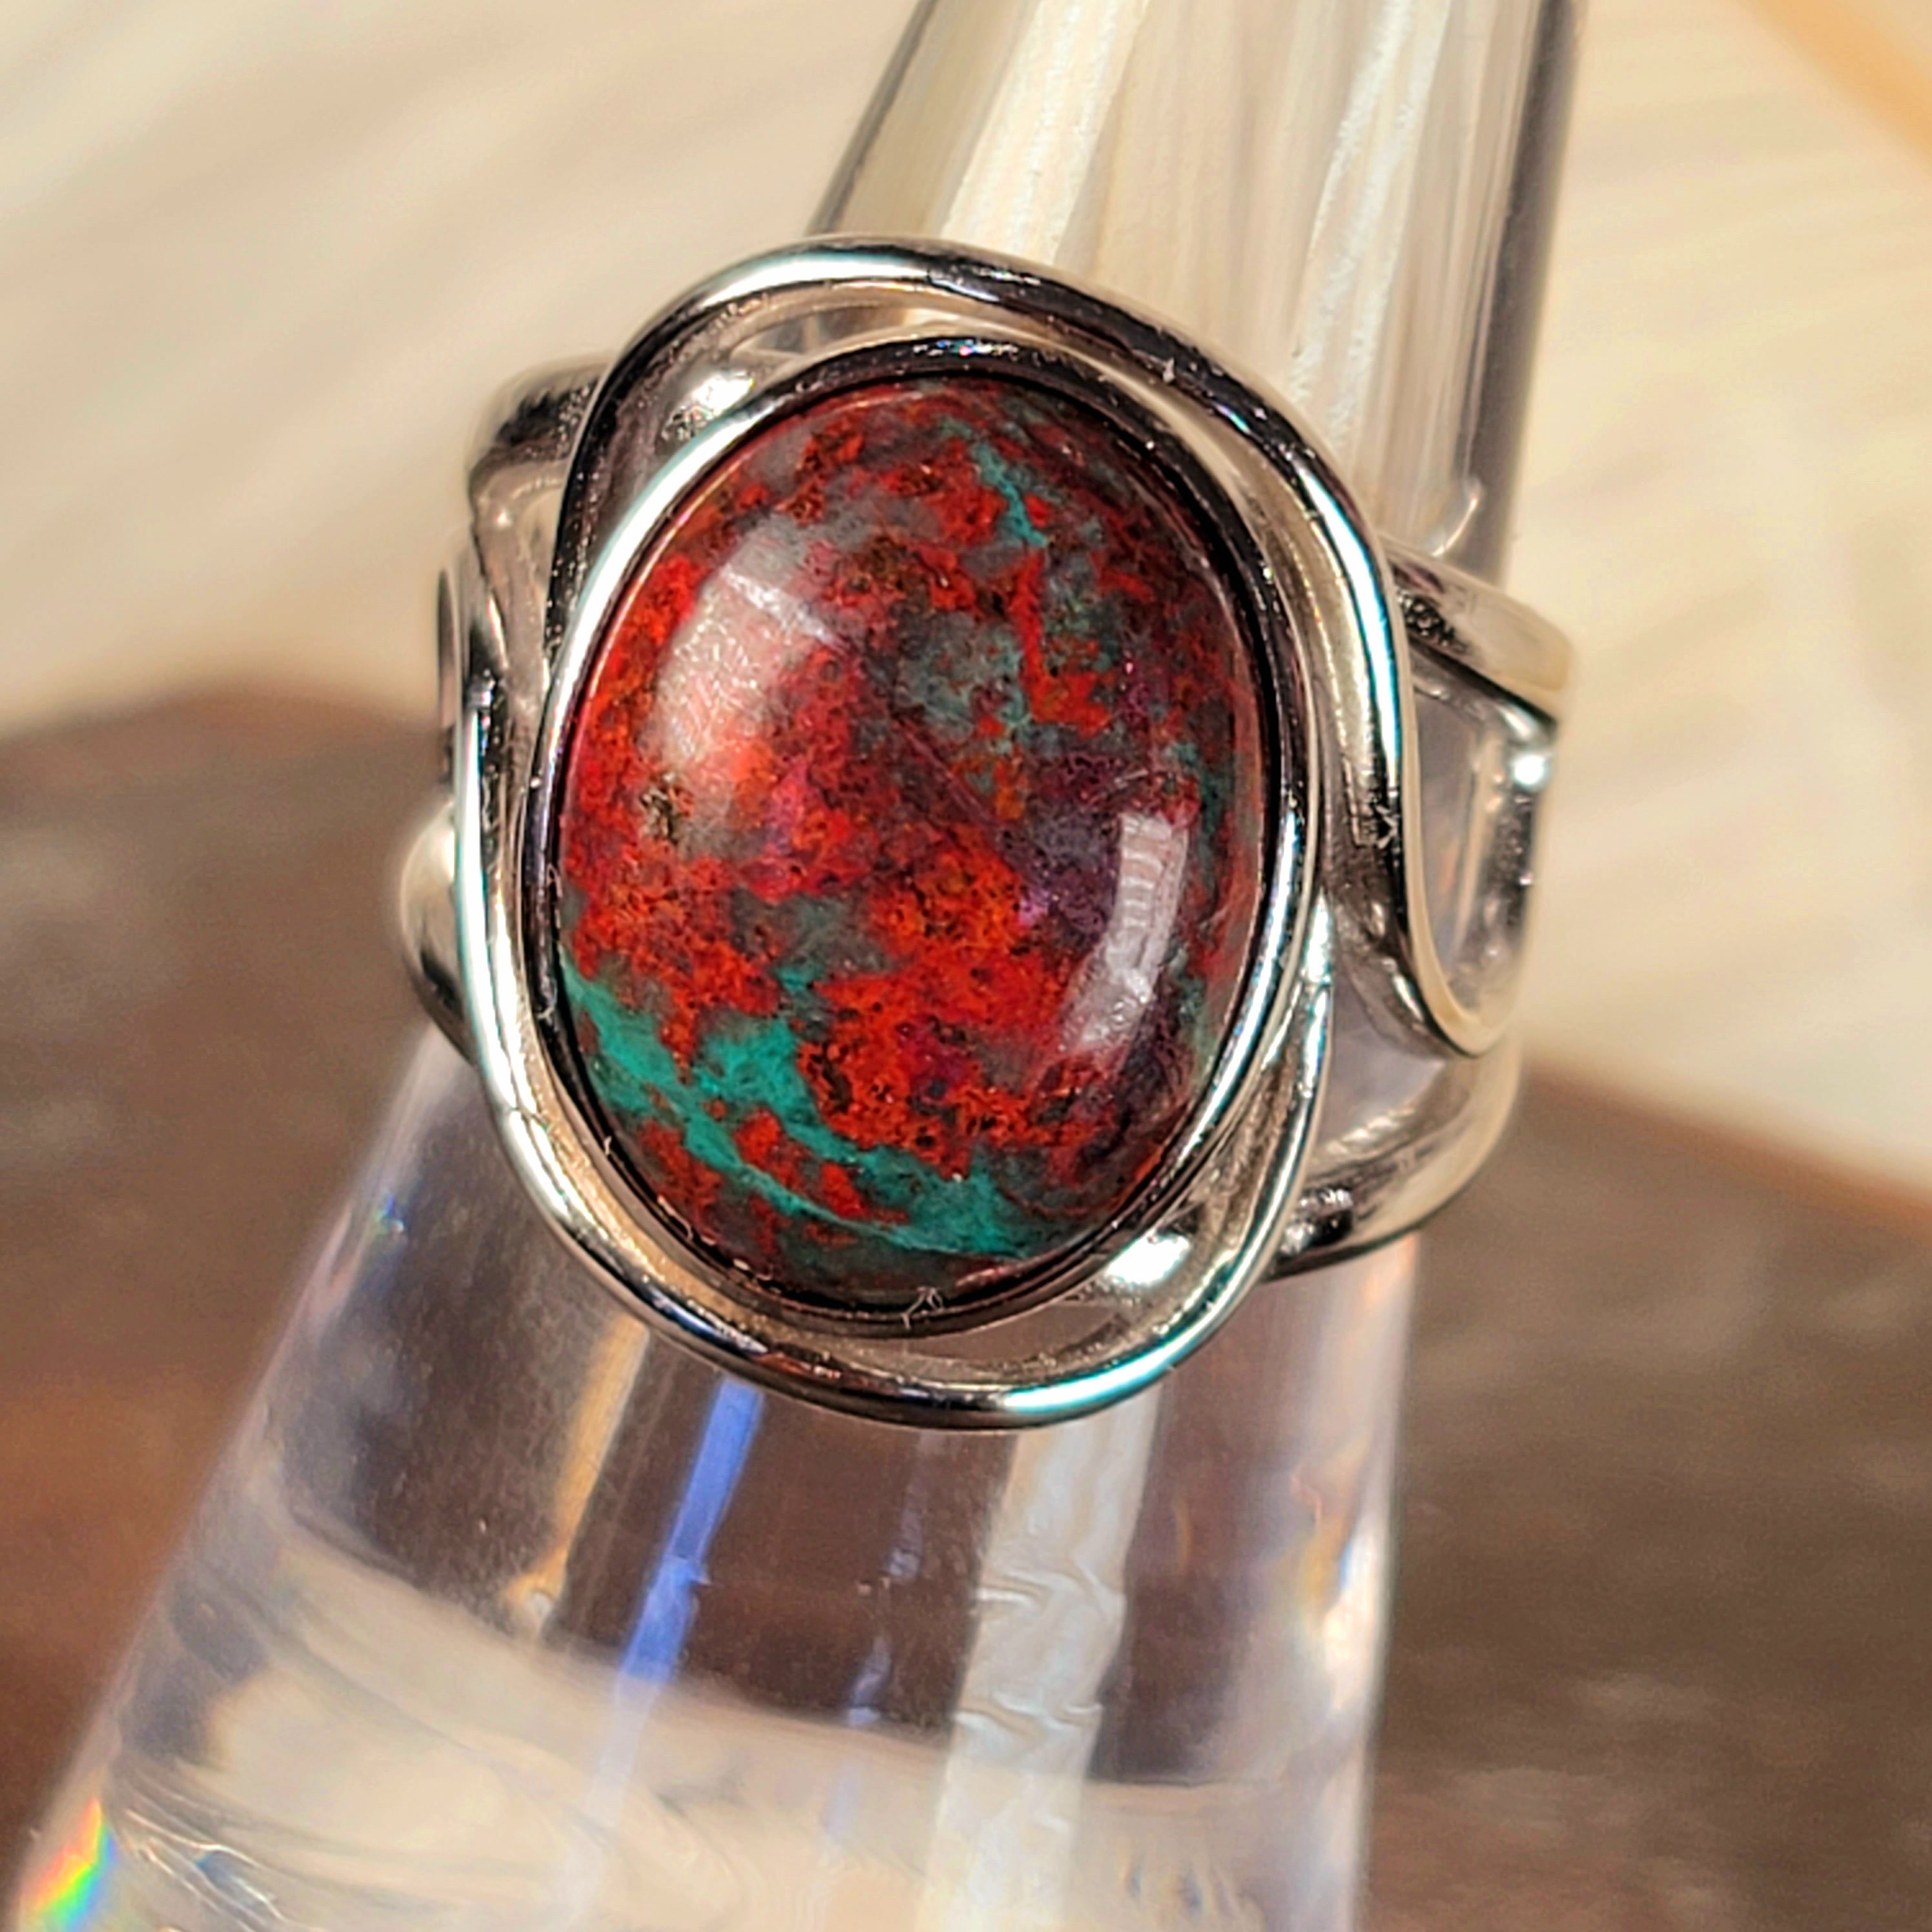 Sonora Sunset Finger Cuff Adjustable Ring .925 Silver for Alchemy, Empowerment and Manifesting